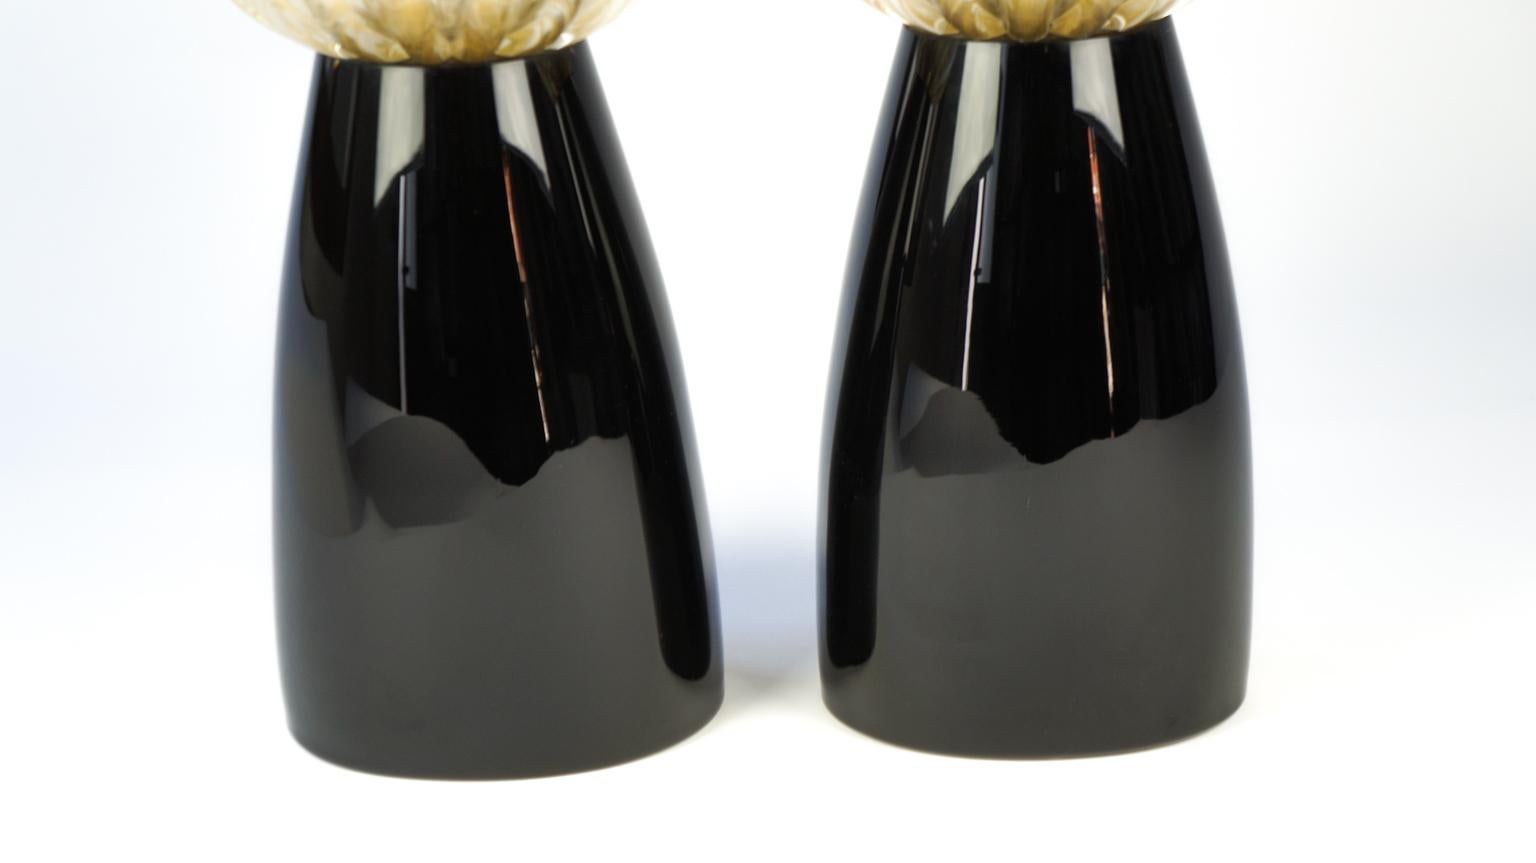 Donà Furnace Mid-Century Modern Black Gold Two of Murano Glass Table Lamps, 1985 For Sale 12